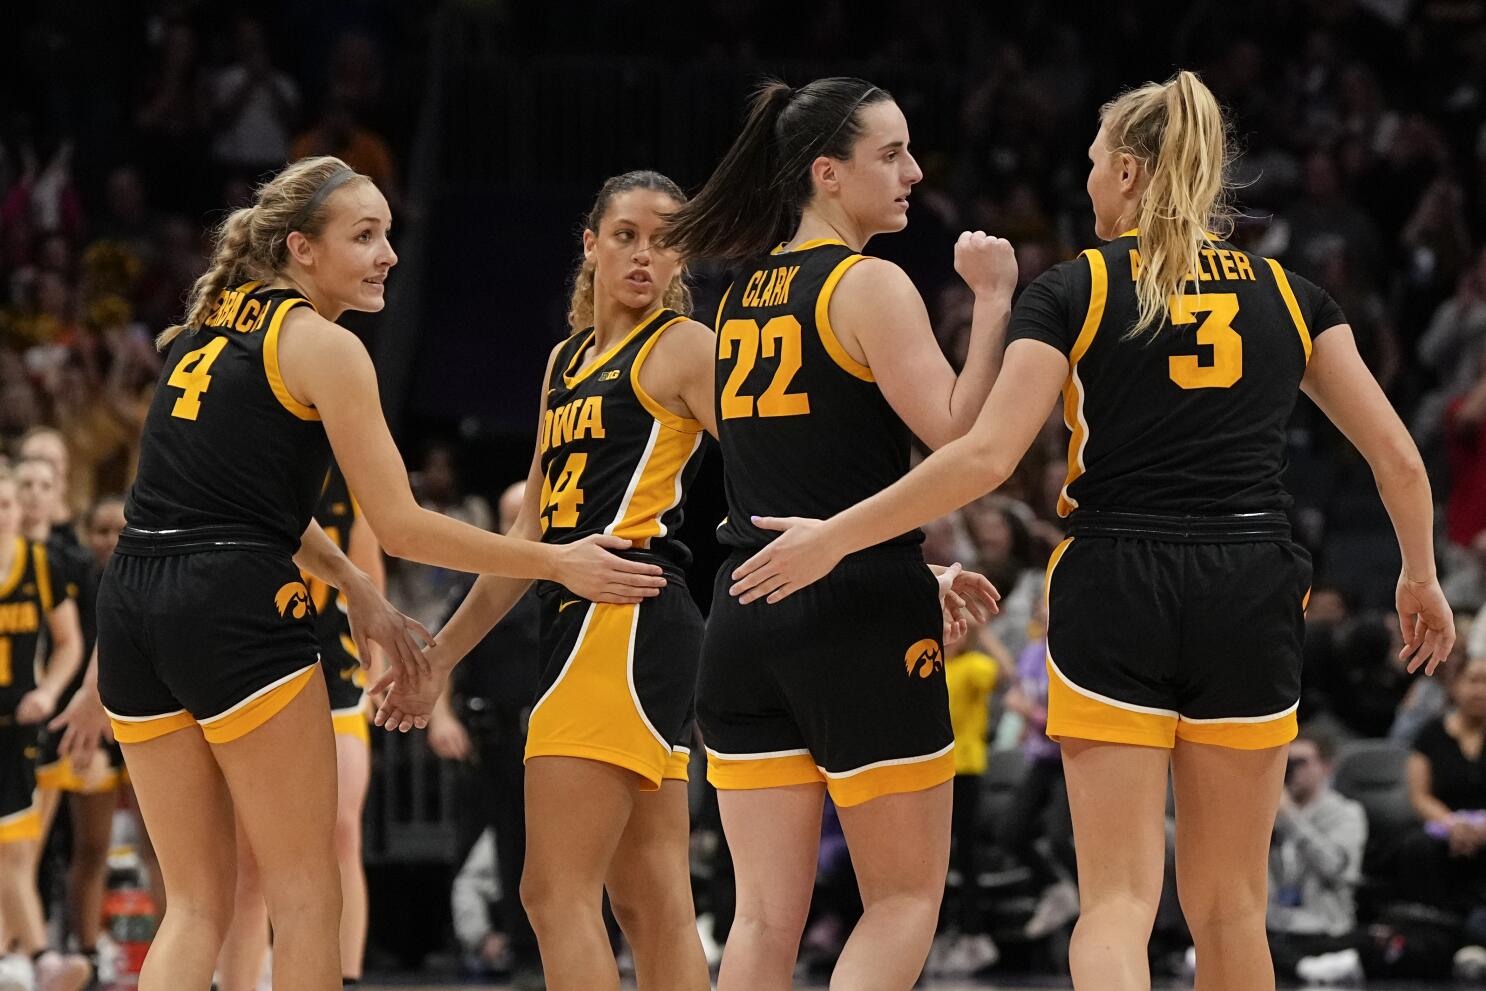 Generational player' Caitlin Clark puts on a show, dropping 44 as No. 3 Iowa tops No. 8 Va Tech - The San Diego Union-Tribune